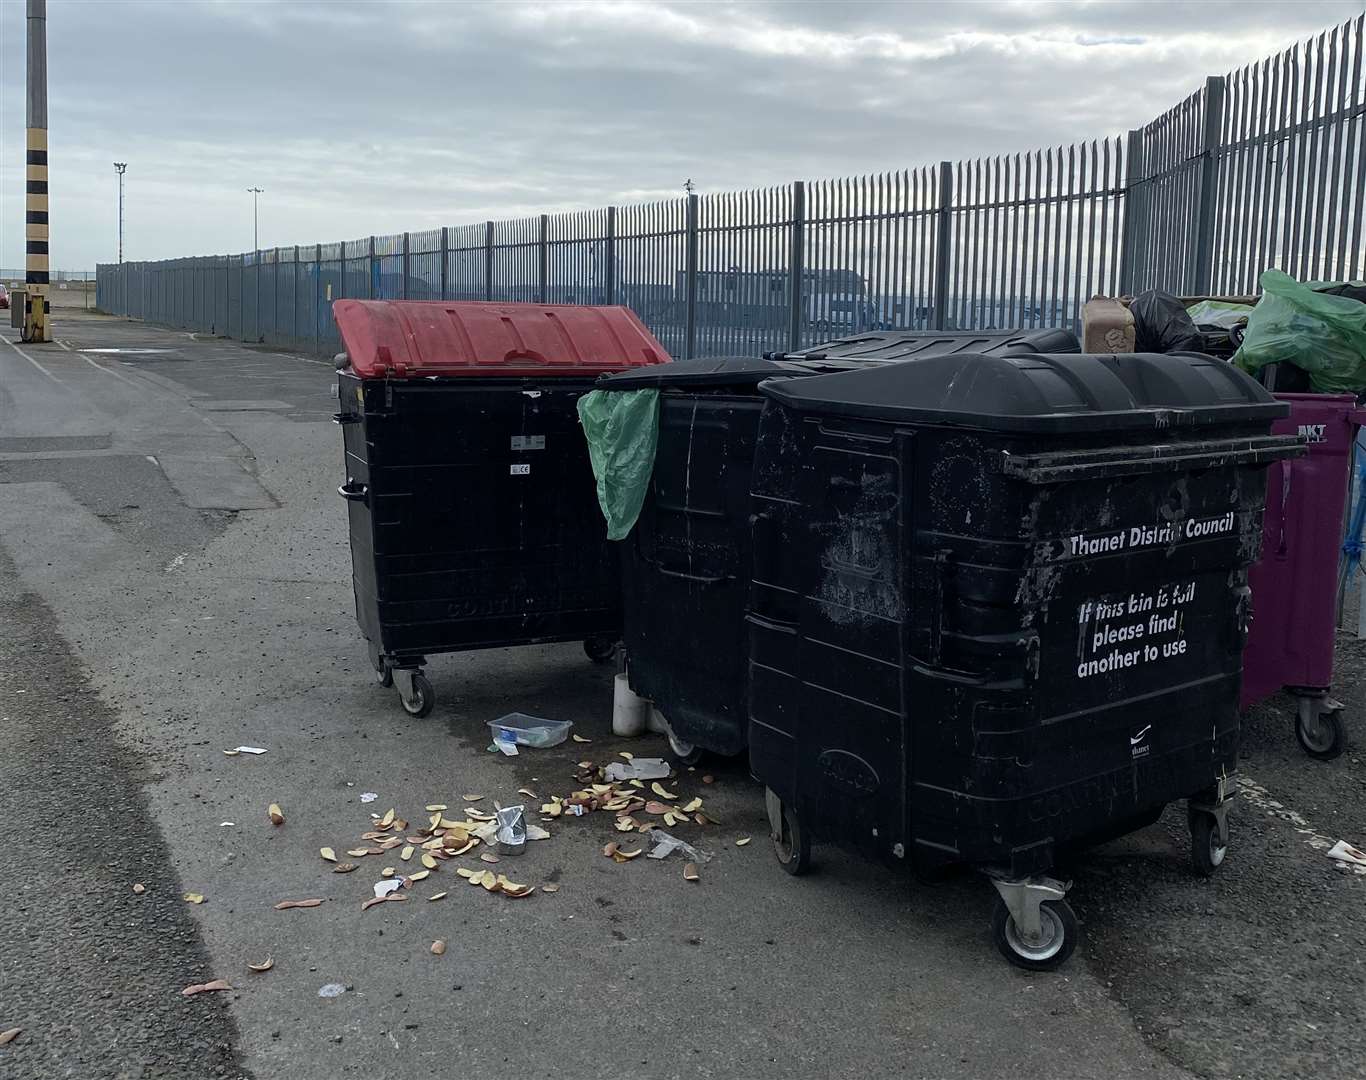 Families say bins are being left unemptied, too